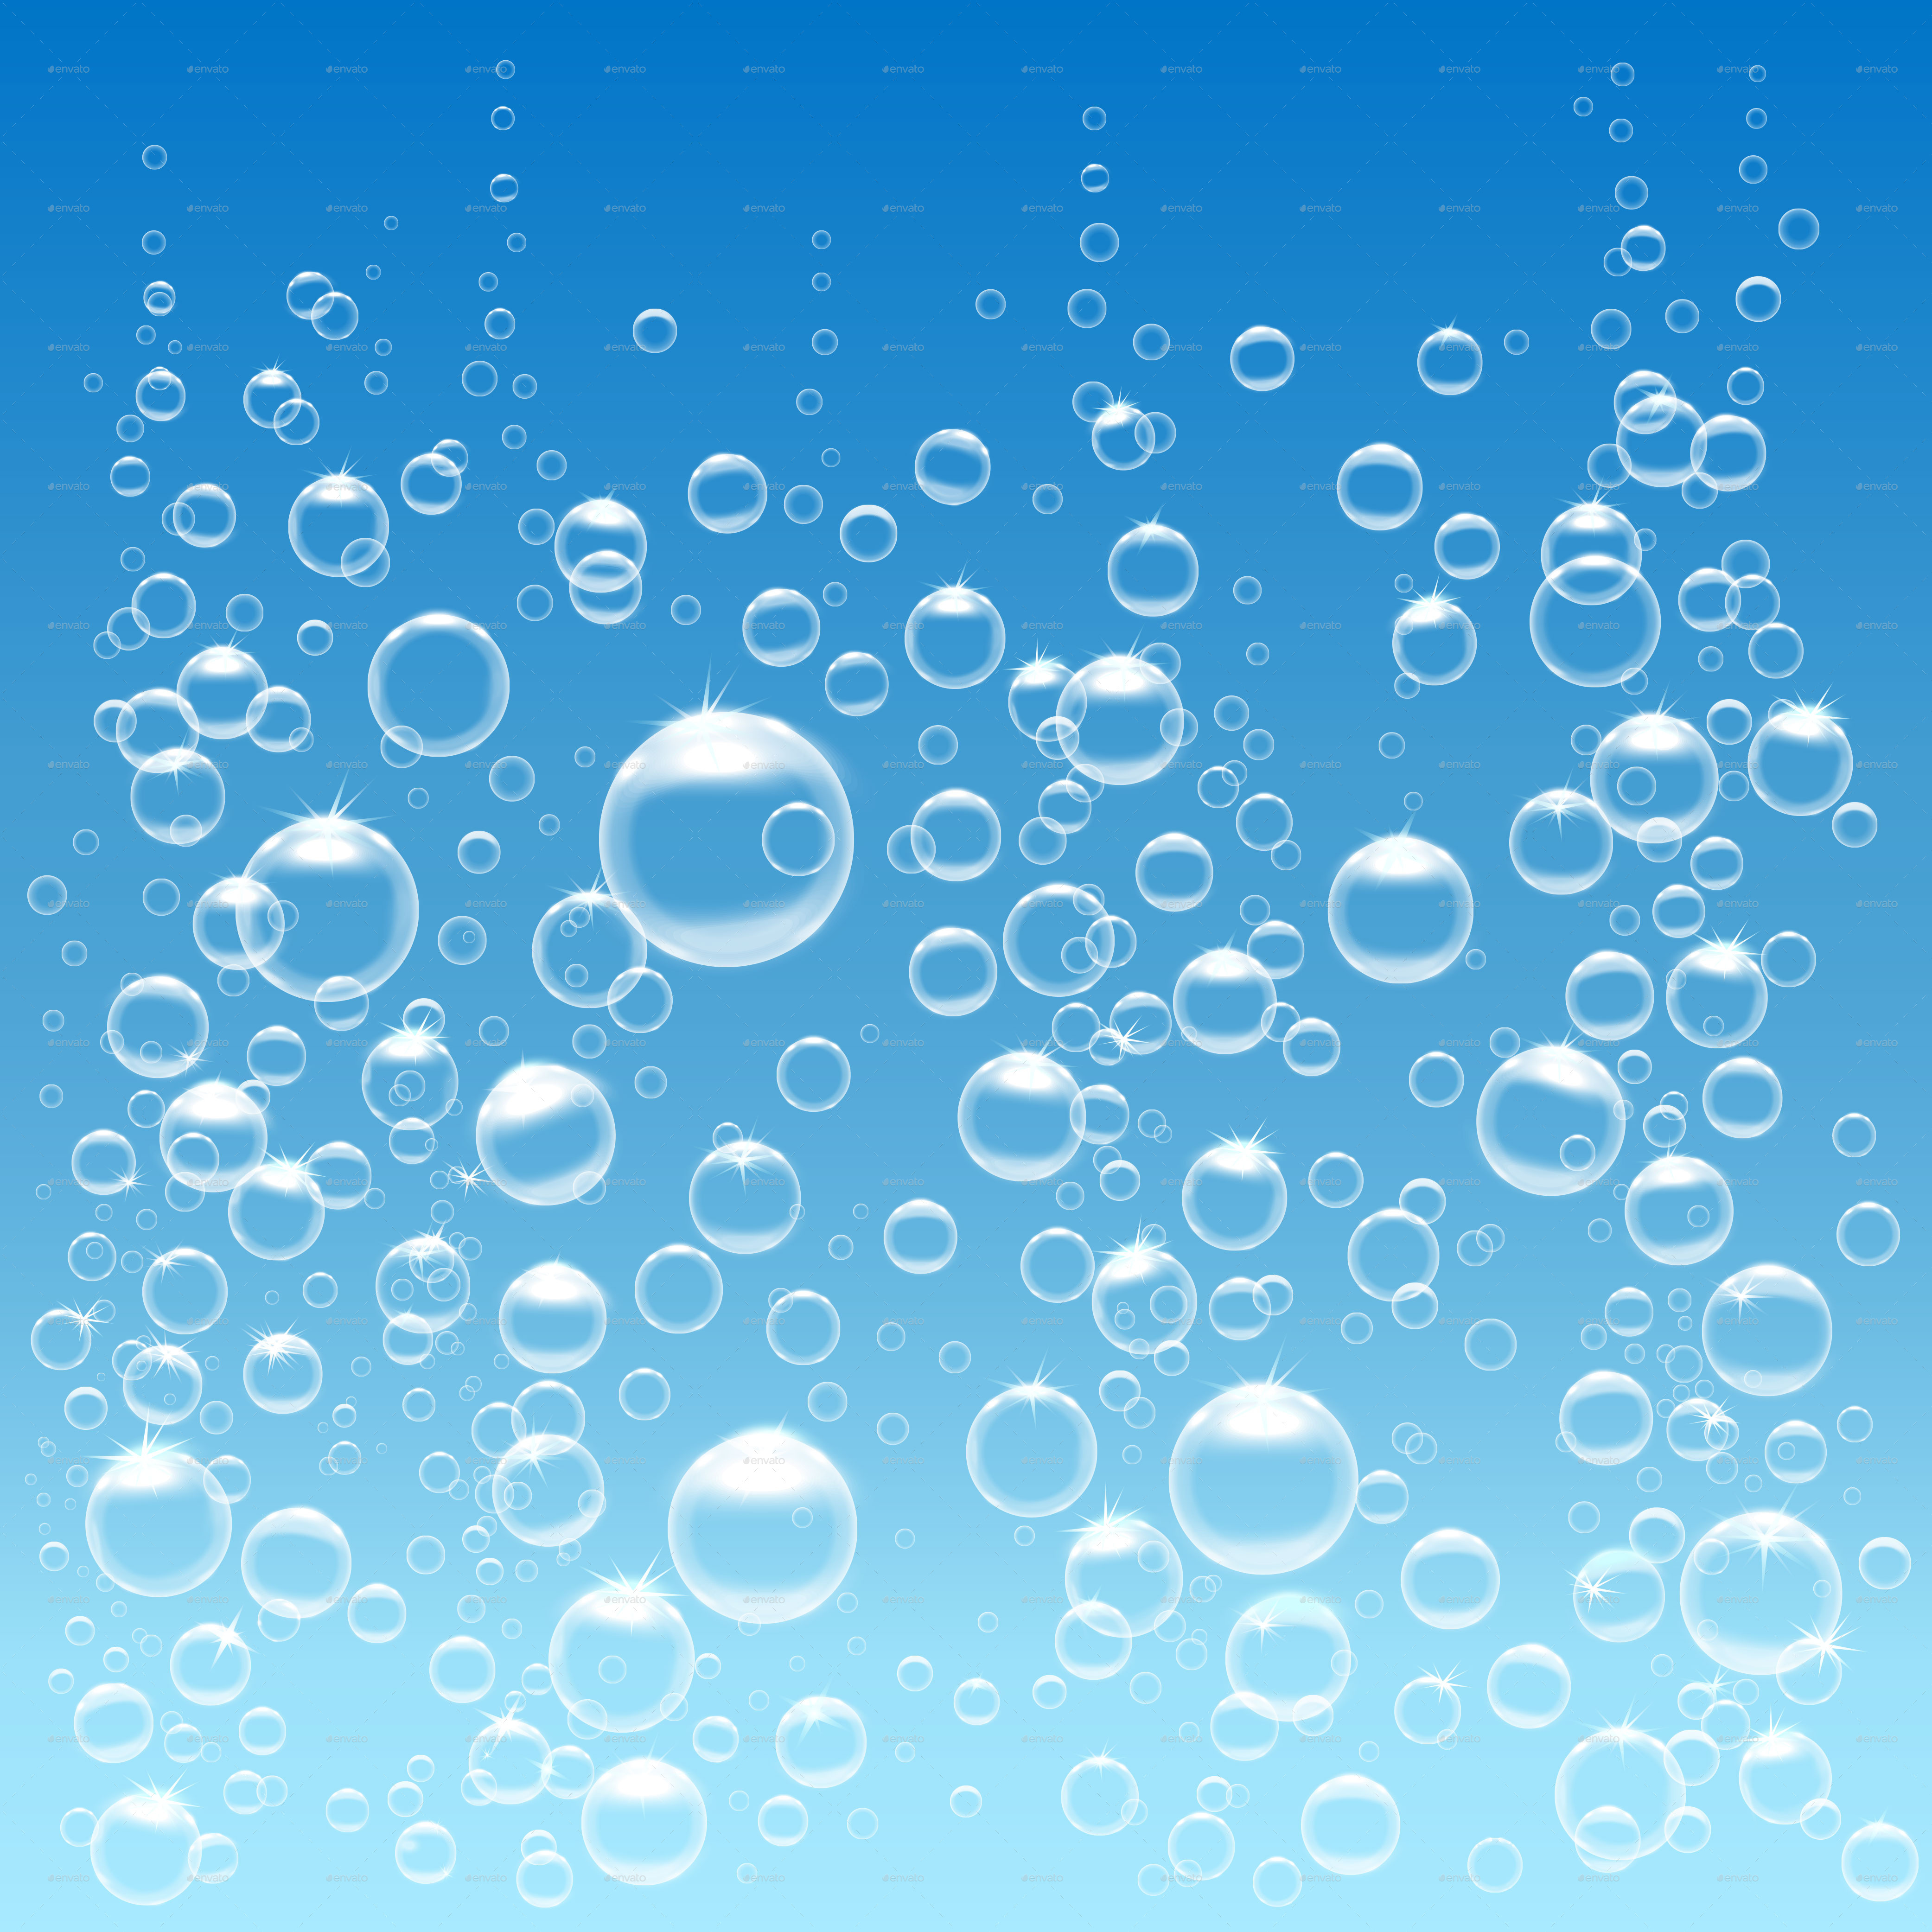 Isolated Bubbles Under Water by yayasya | GraphicRiver